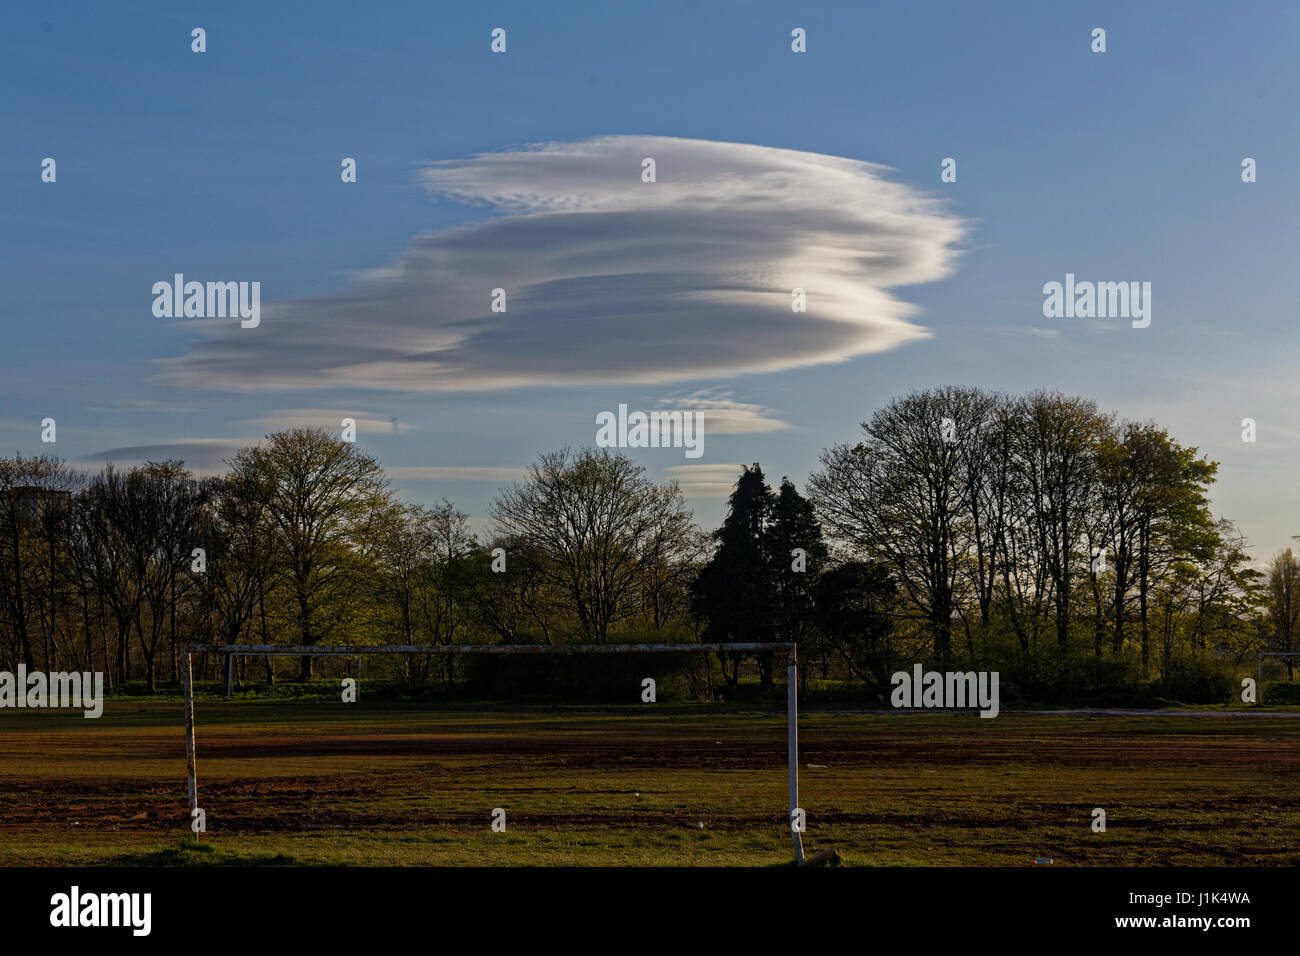 Glasgow, Scotland, UK, 21st April, Strange UFO shapes over the city,Lenticular clouds  Altocumulus lenticularis   are stationary lens-shaped clouds that form in the troposphere © Gerard Ferry/Alamy Live News Stock Photo